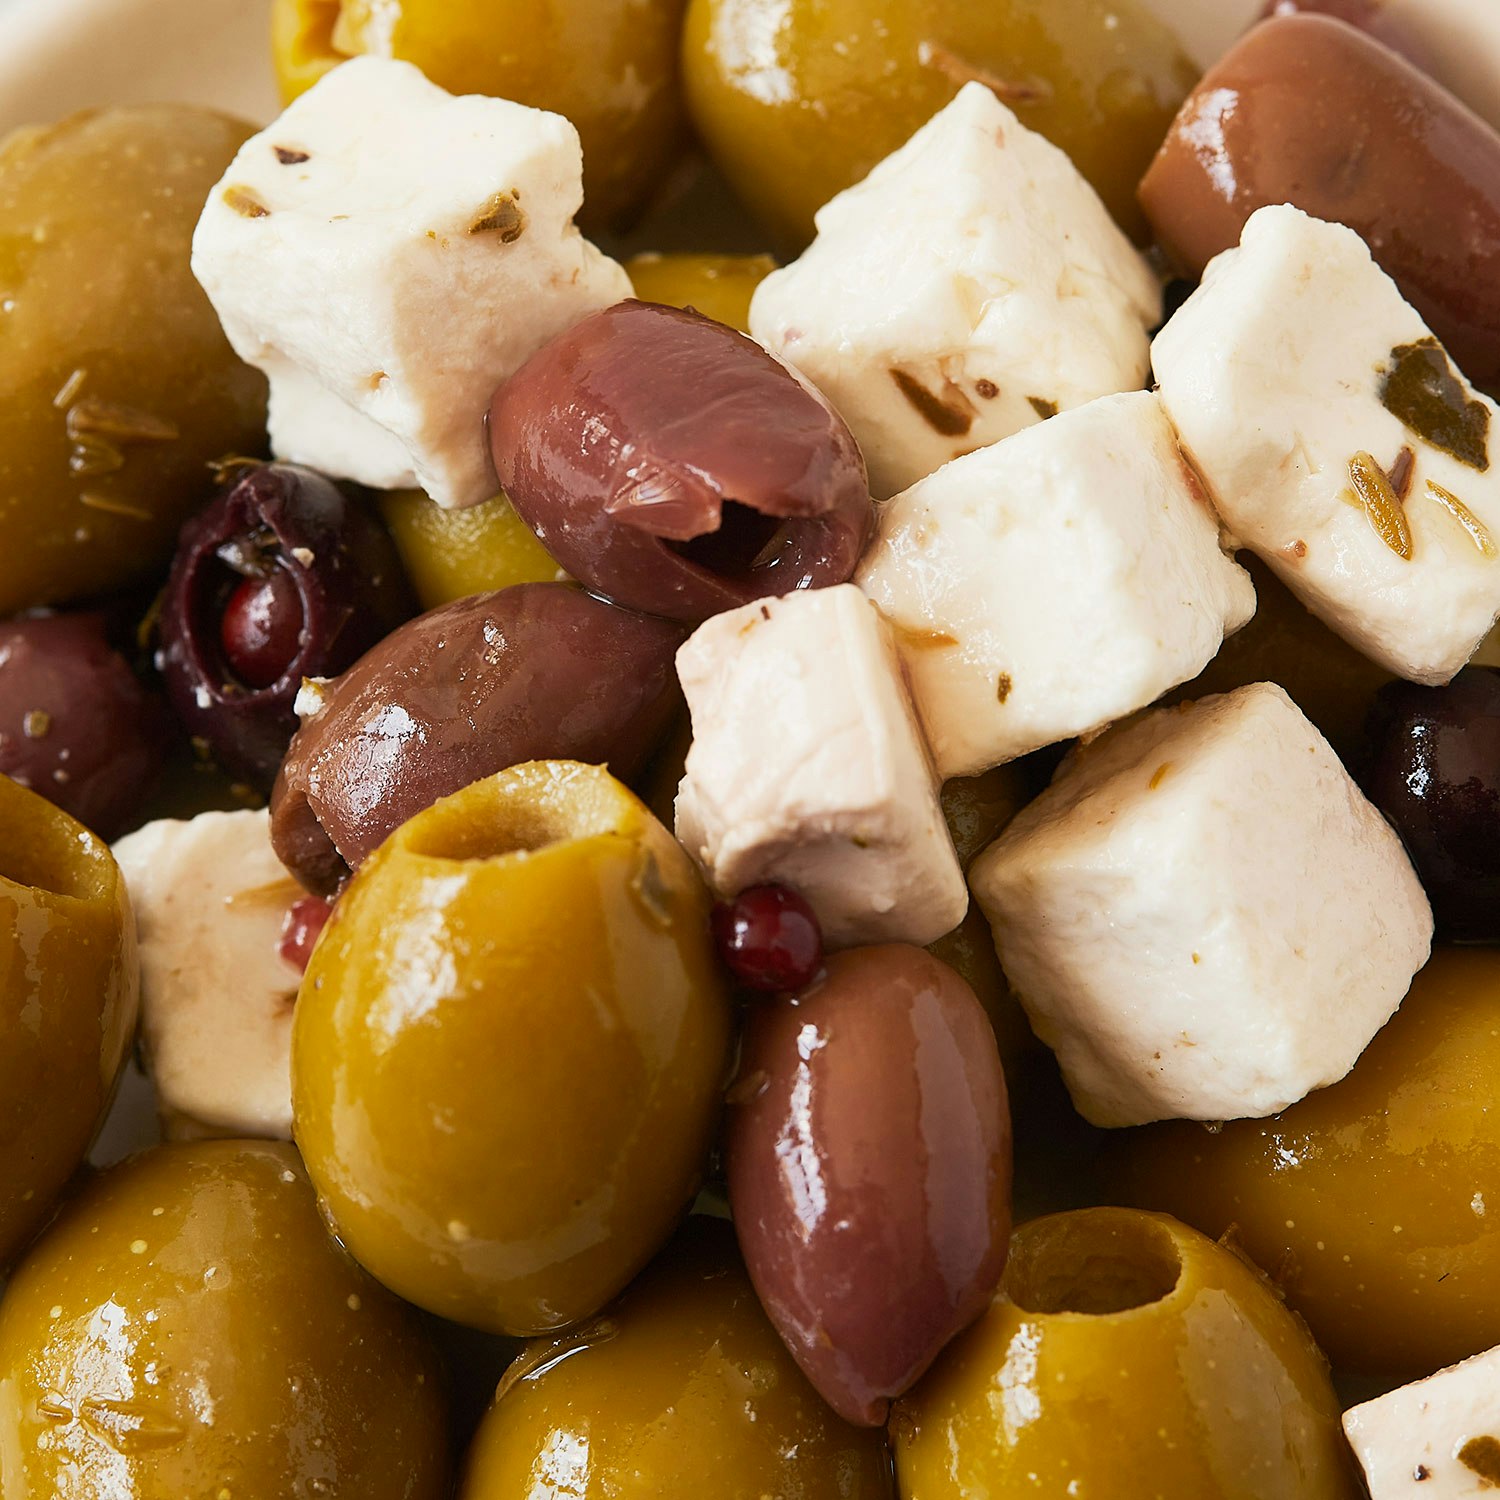 Murrays-Marinated-Feta-And-Greek-Olives-specialty-foods-127343-03